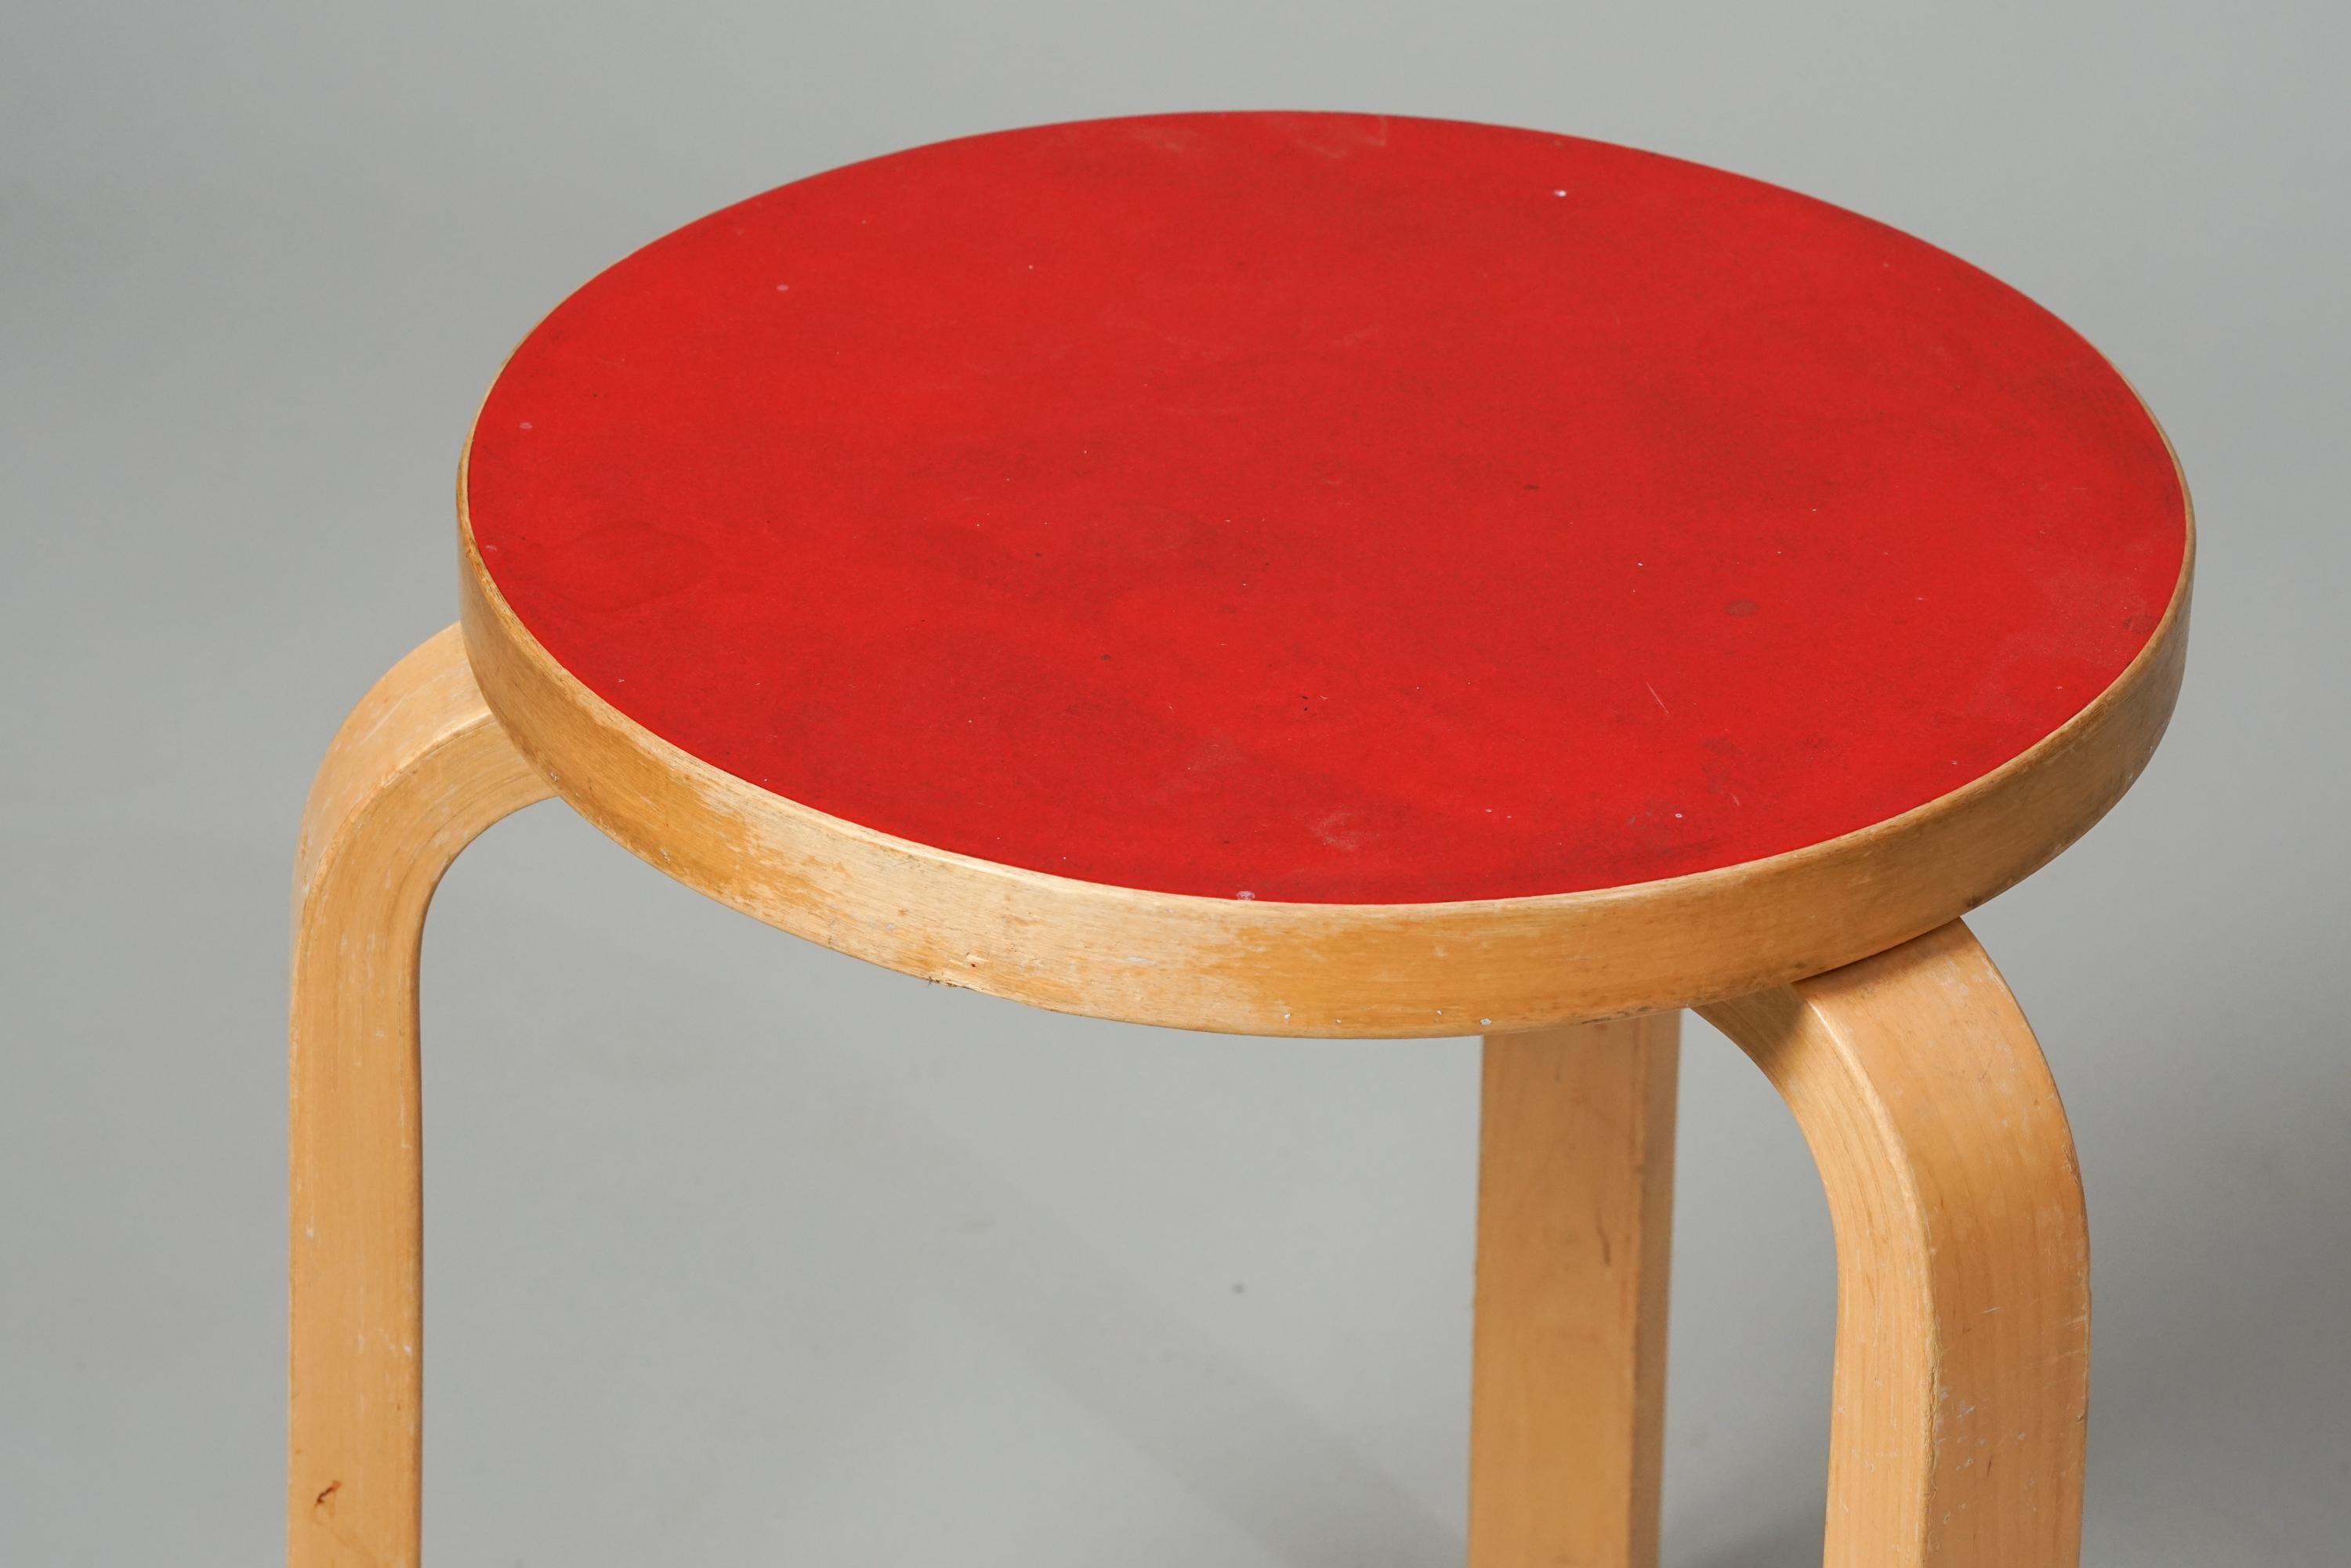 Model 60 Stool by Alvar Aalto for Artek from the 1960s. Birch frame with linoleum top. Good vintage condition, beautiful patina and wear consistent with age and use. Classic Alvar Aalto design.